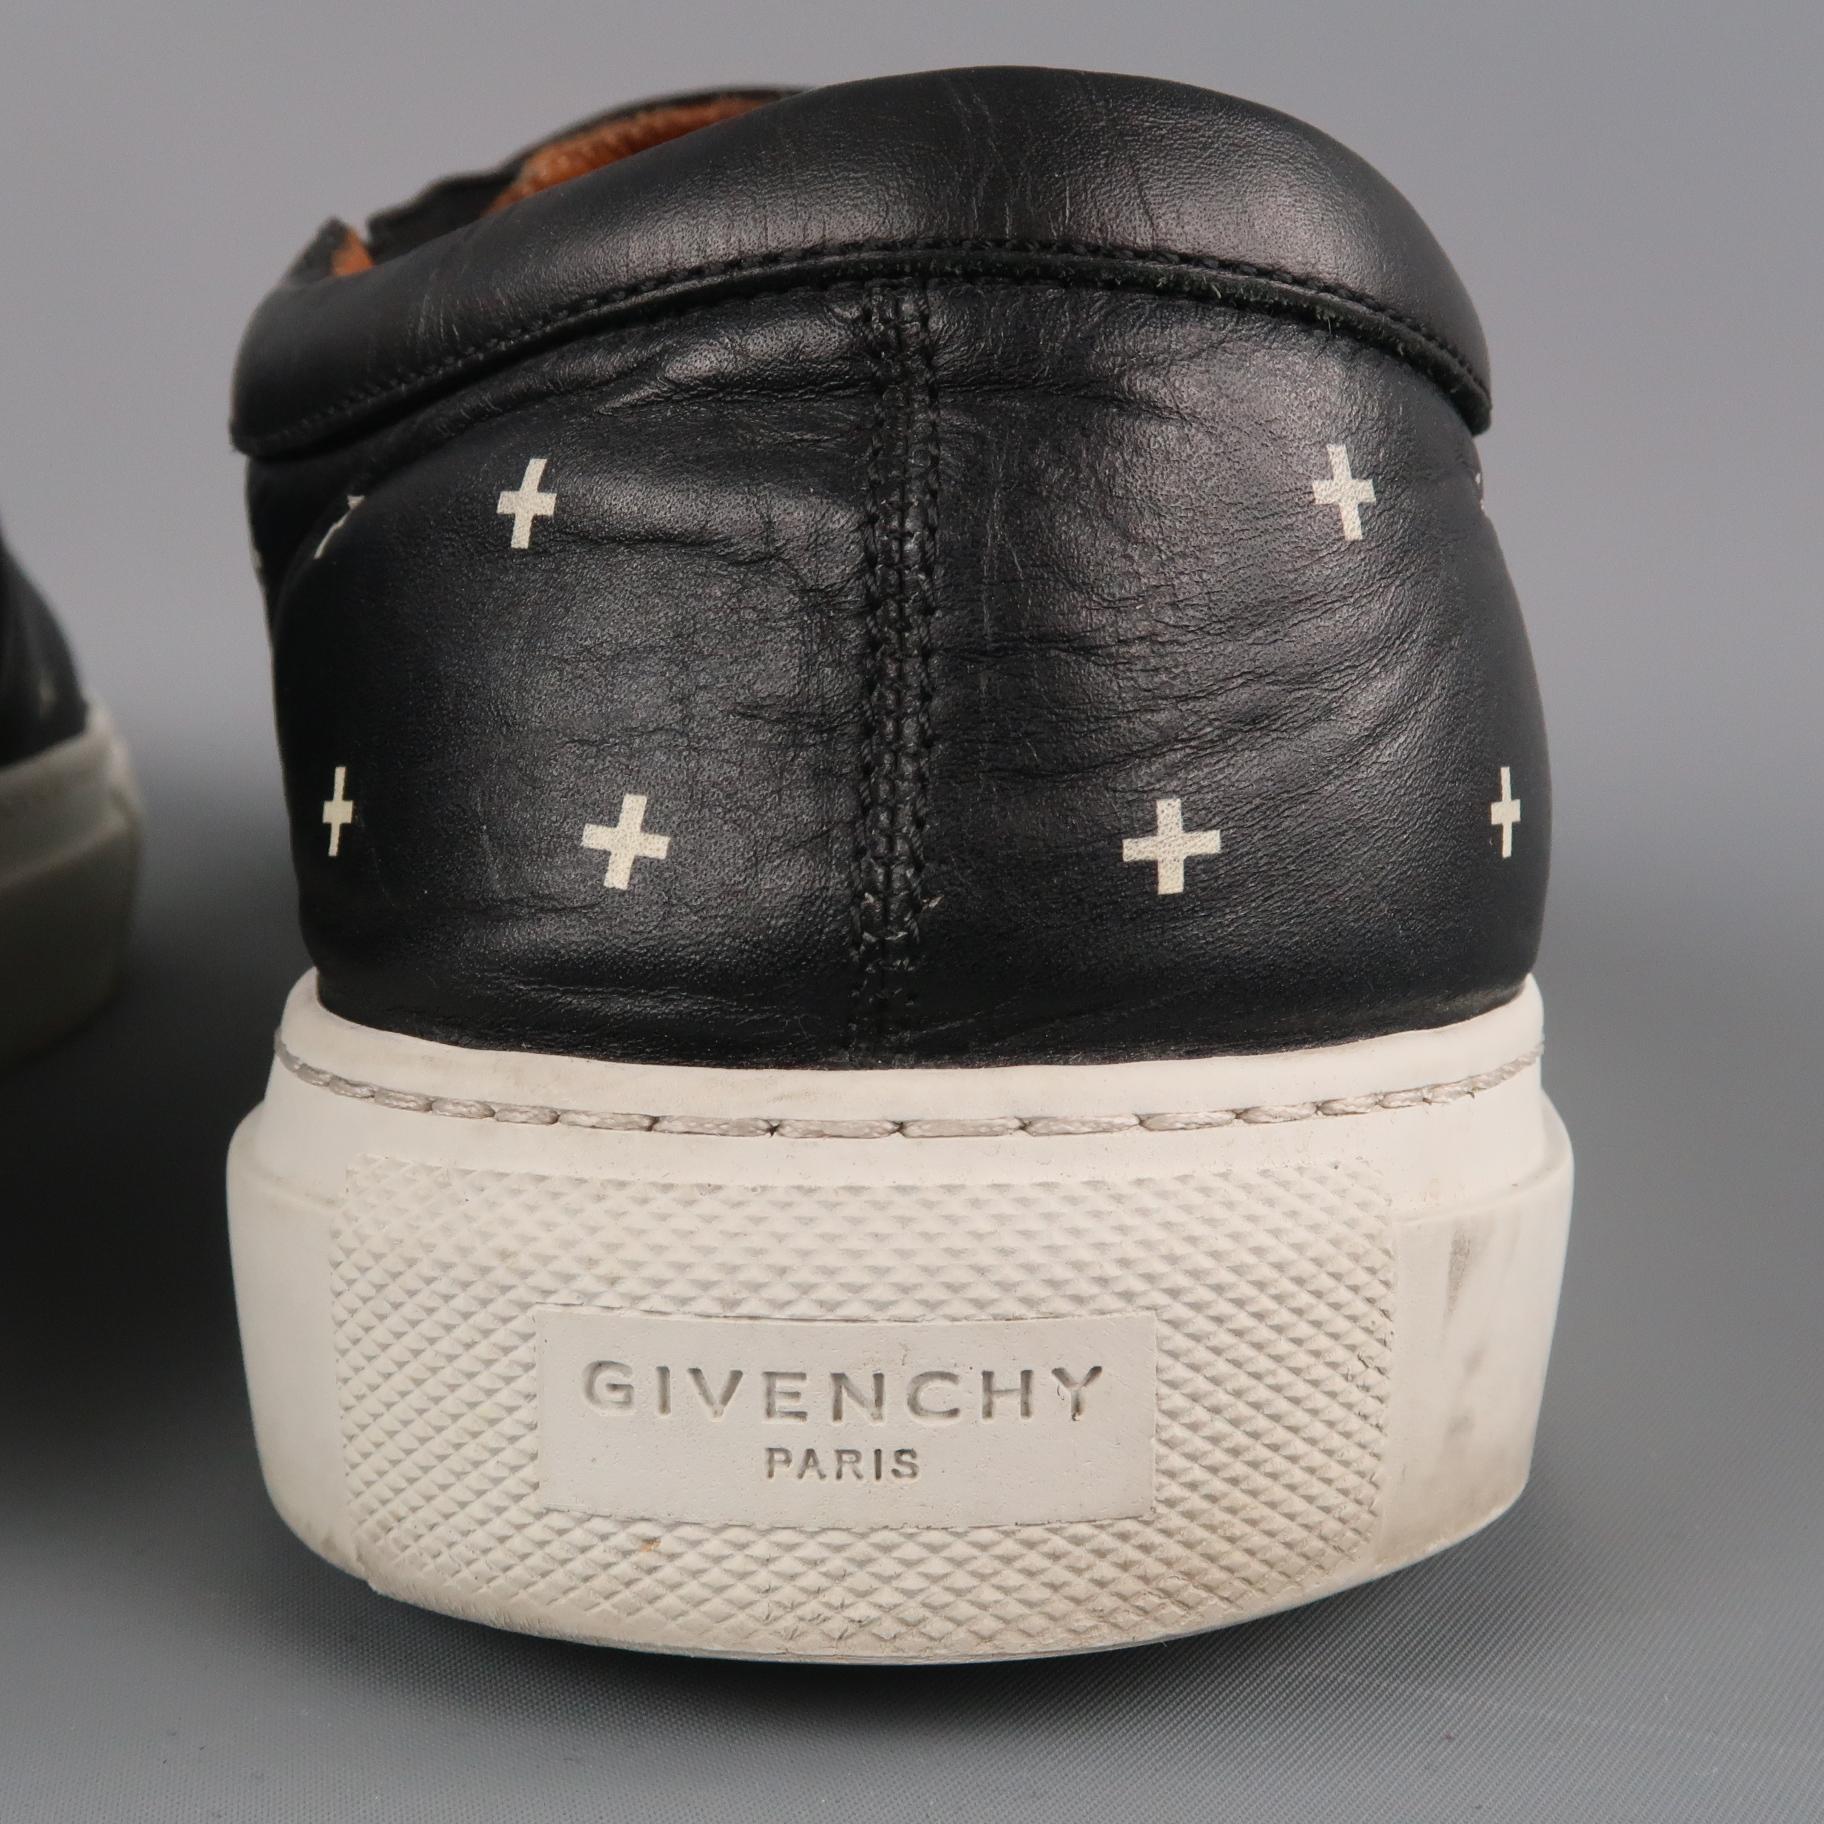 Men's GIVENCHY Size 11 Black & White Cross Leather Slip On Sneakers 7